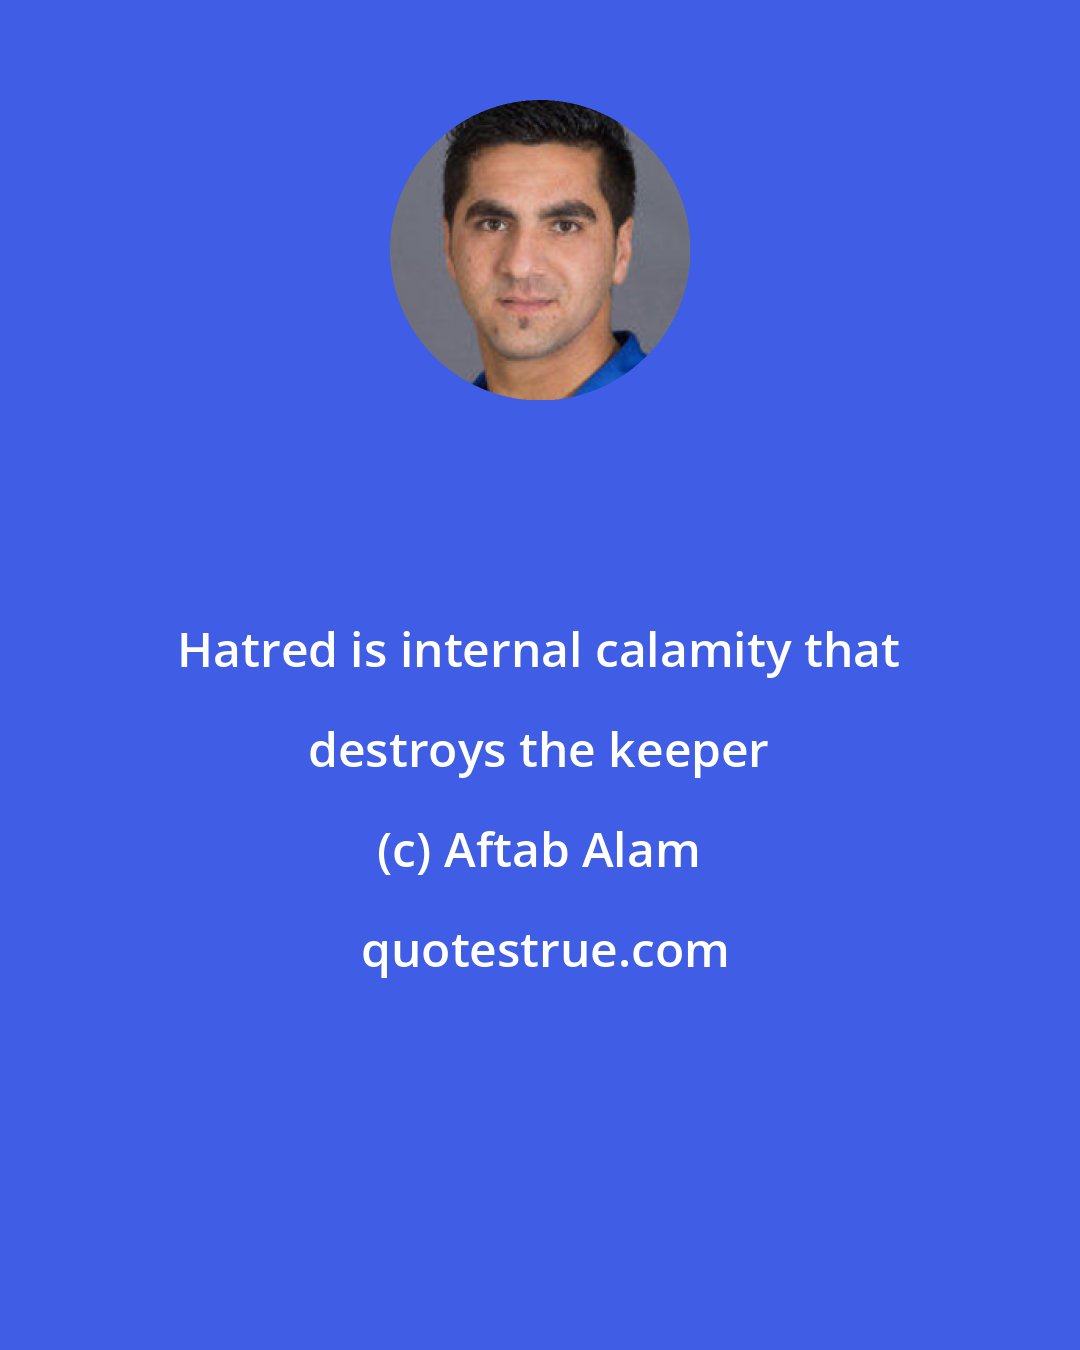 Aftab Alam: Hatred is internal calamity that destroys the keeper